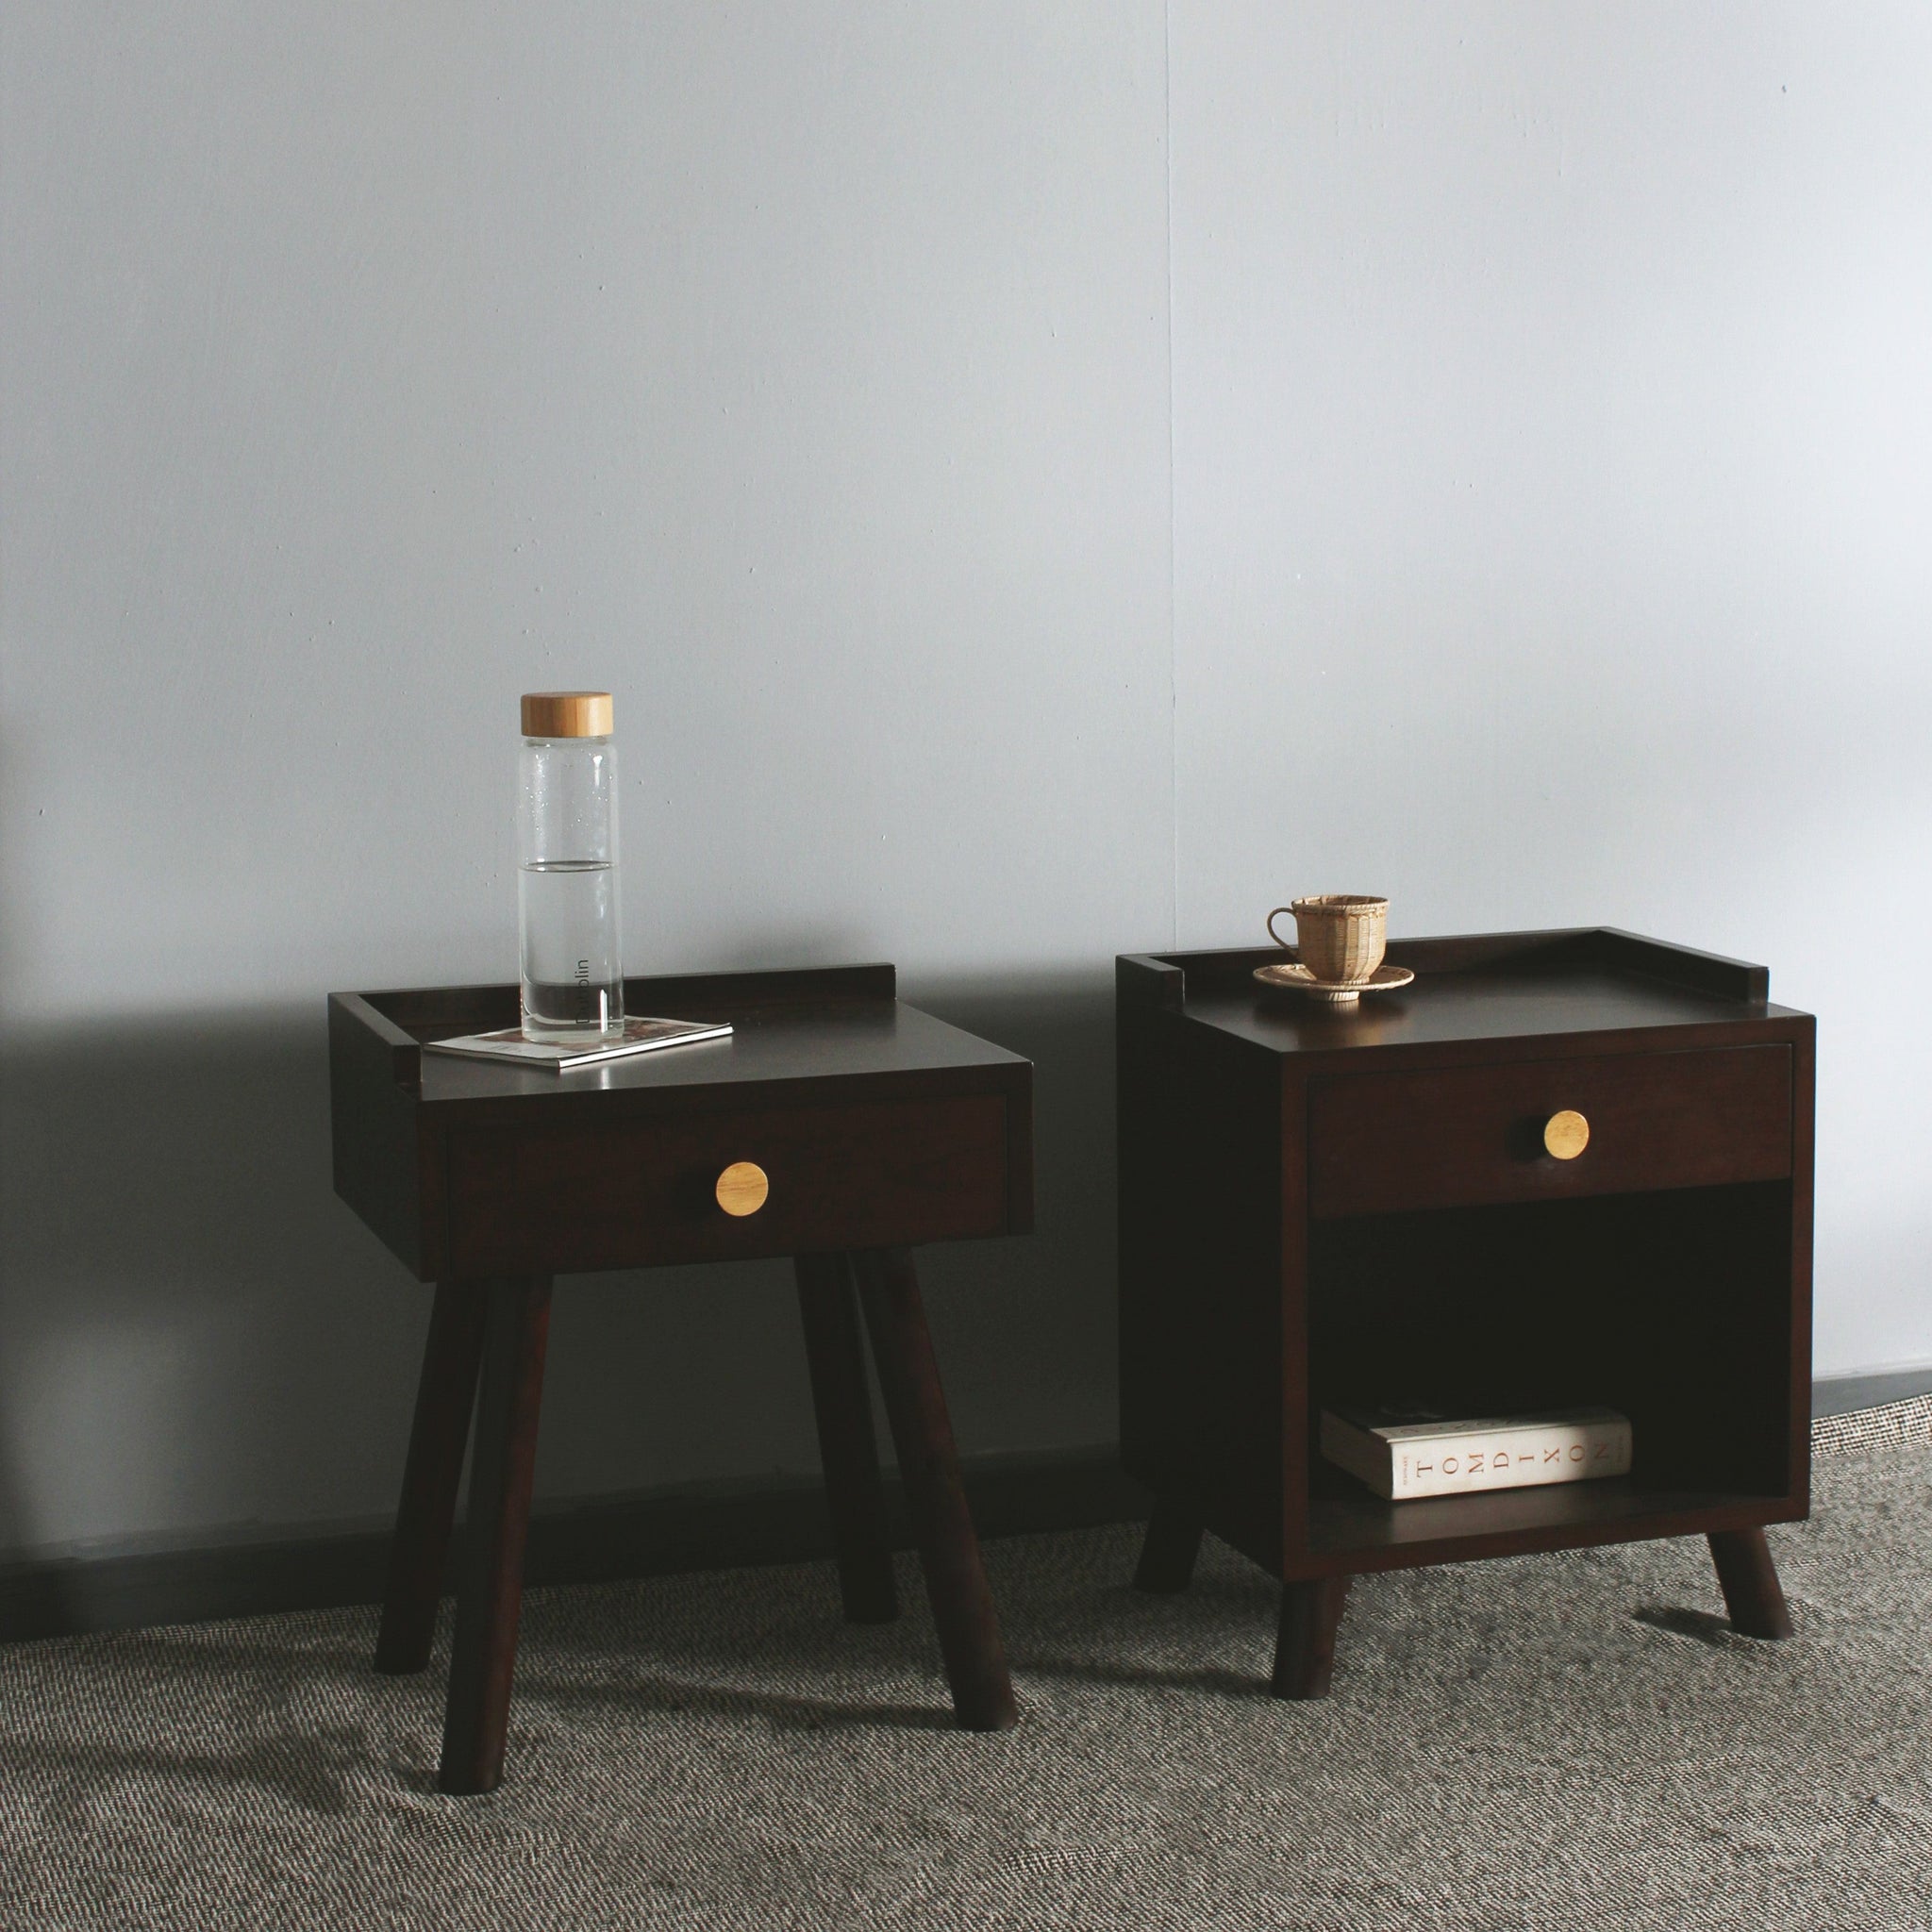 Coincidence Bedside Table - Set of 2